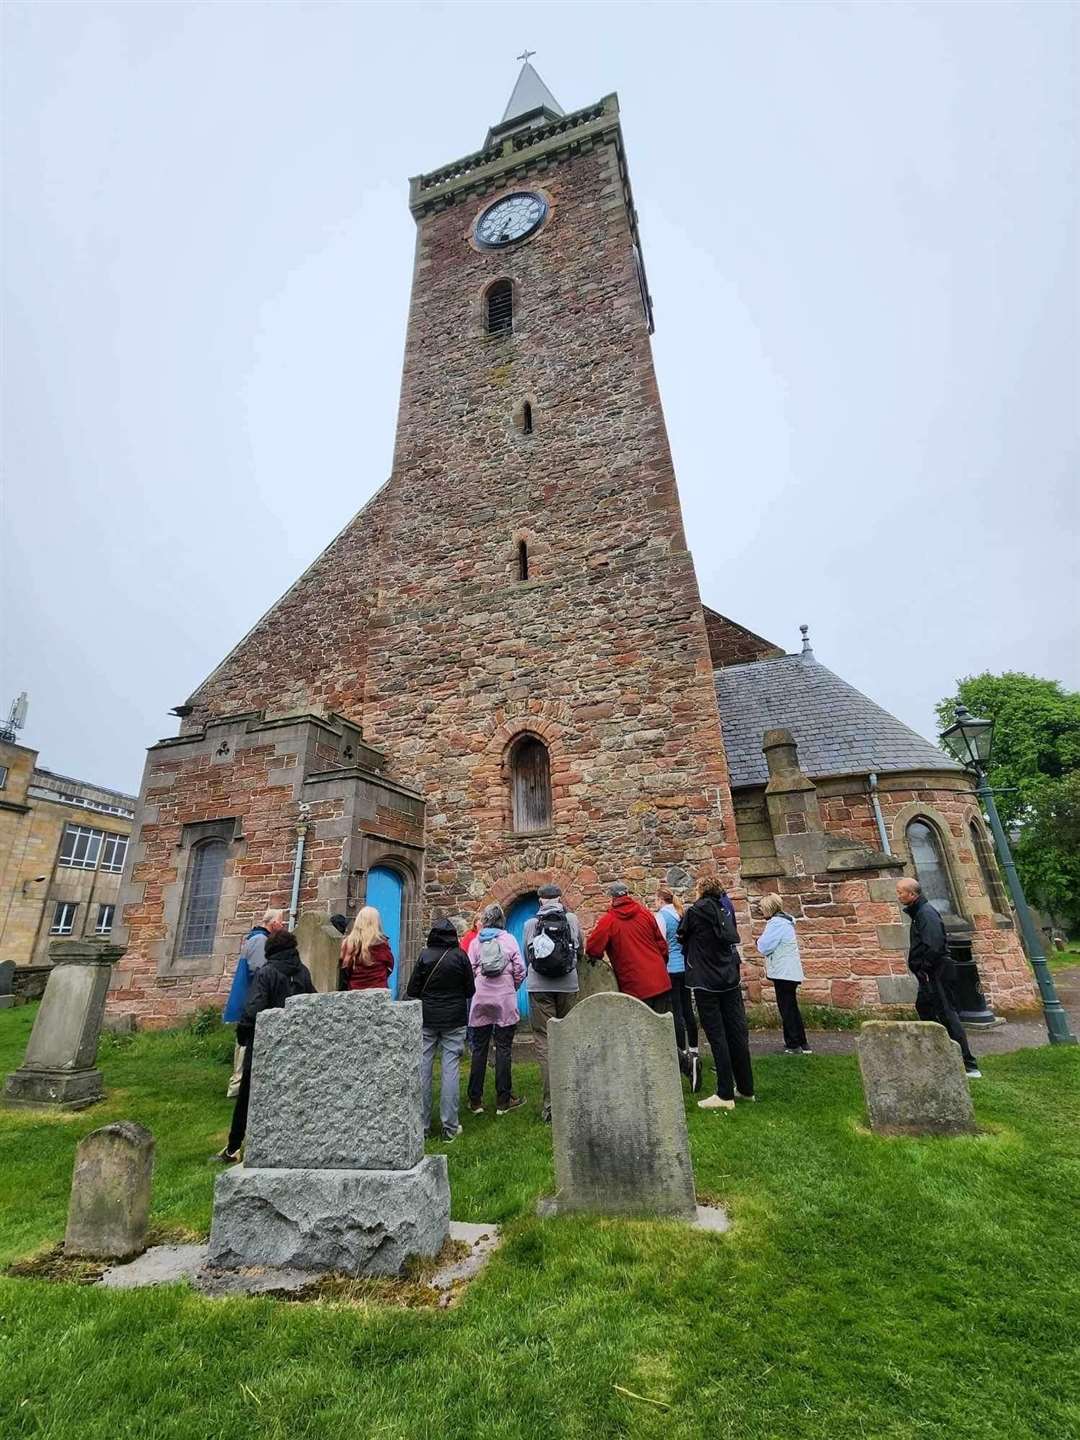 The ONC visit the the Old High Church.